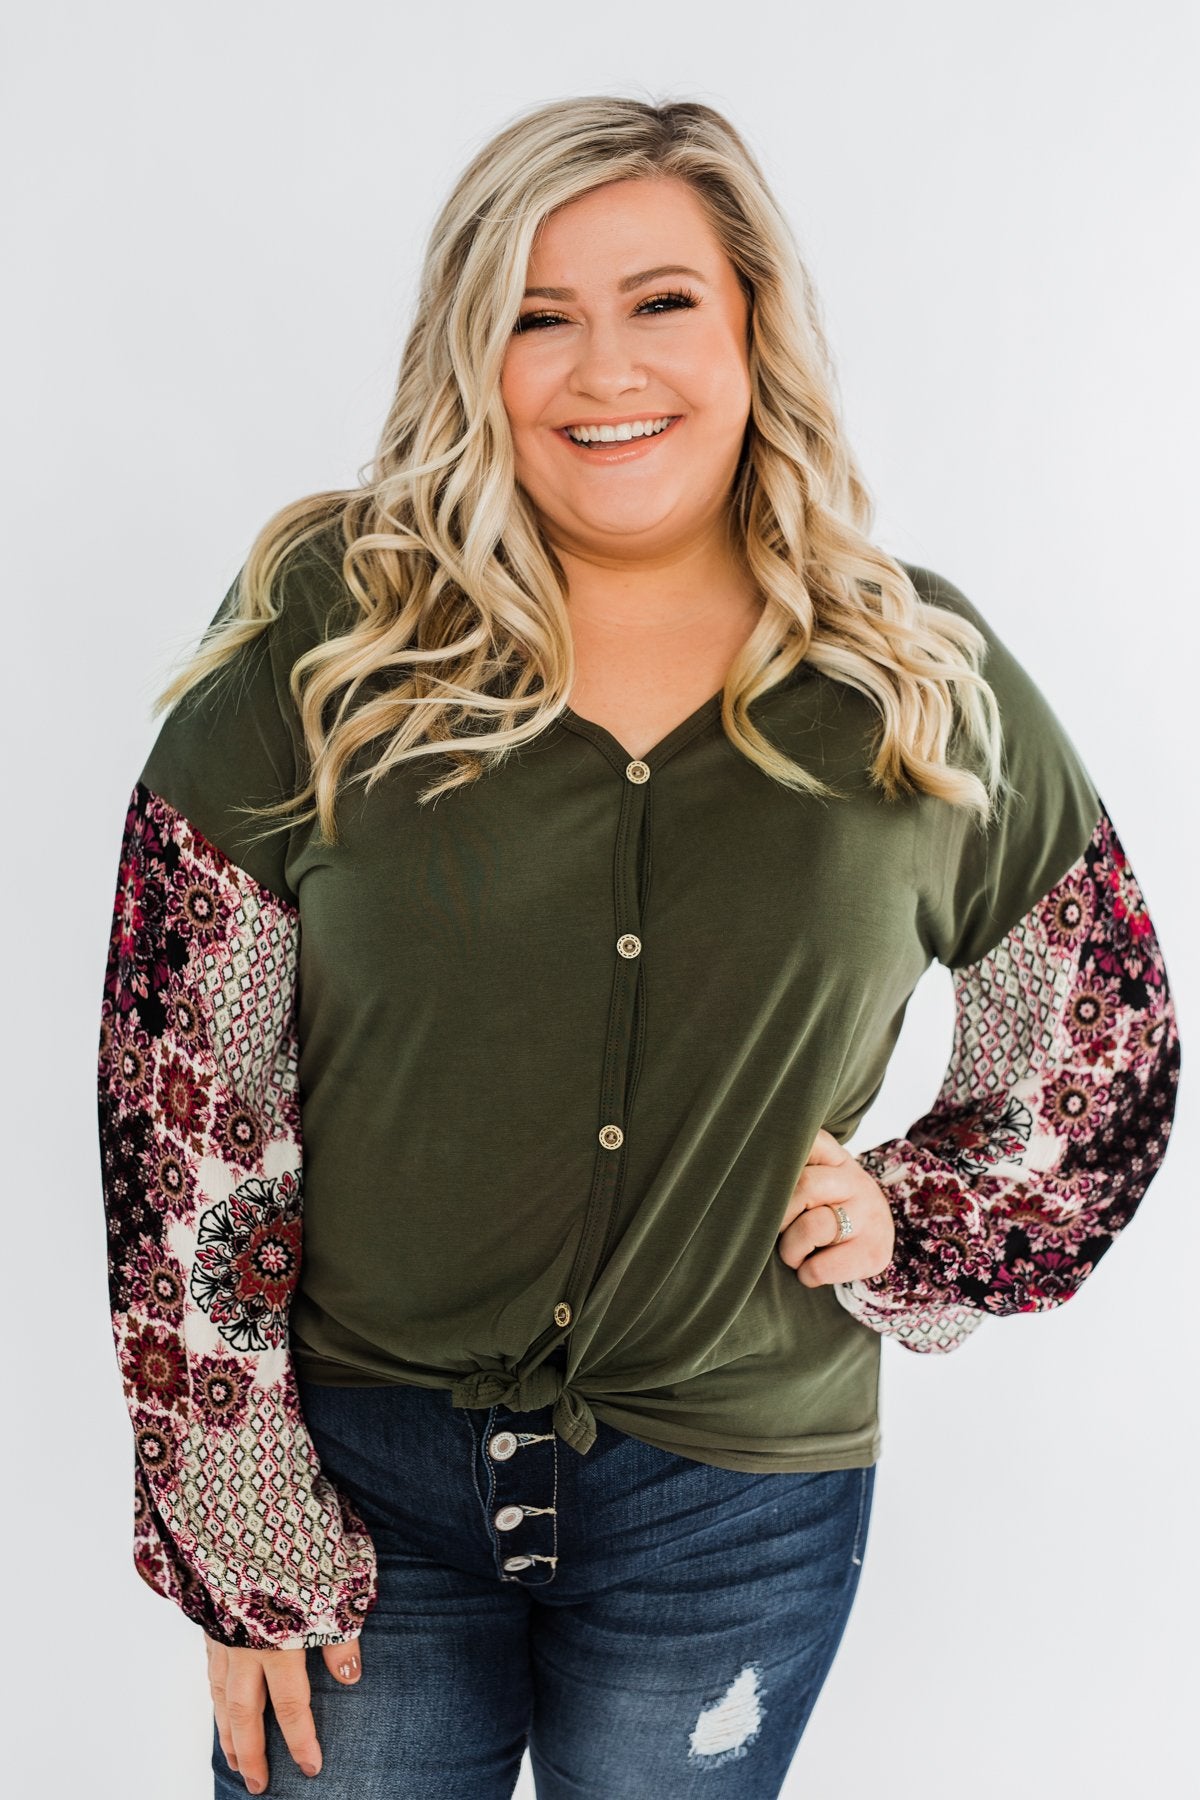 Stay Beautiful Floral Button Top- Olive